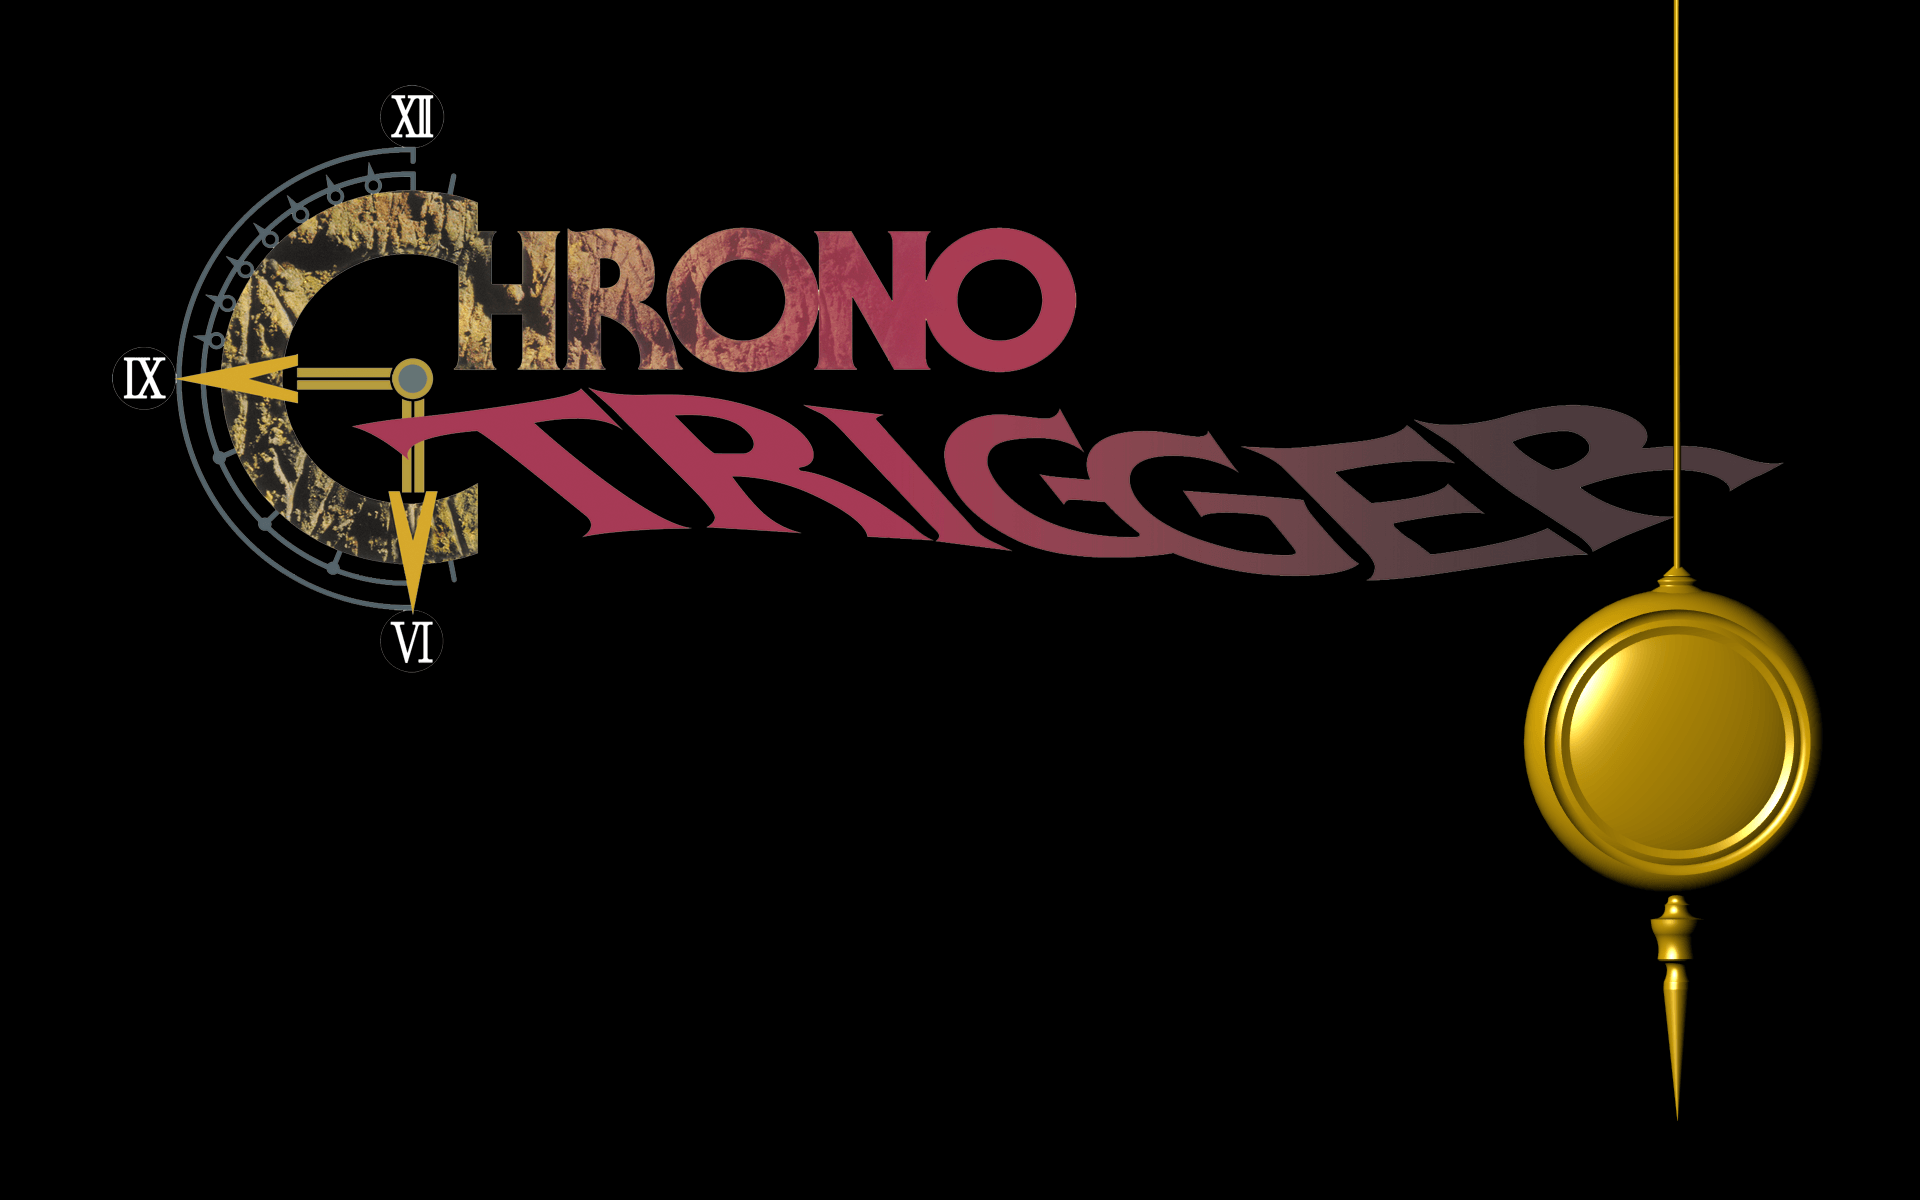 Chrono Trigger Wallpapers Pictures